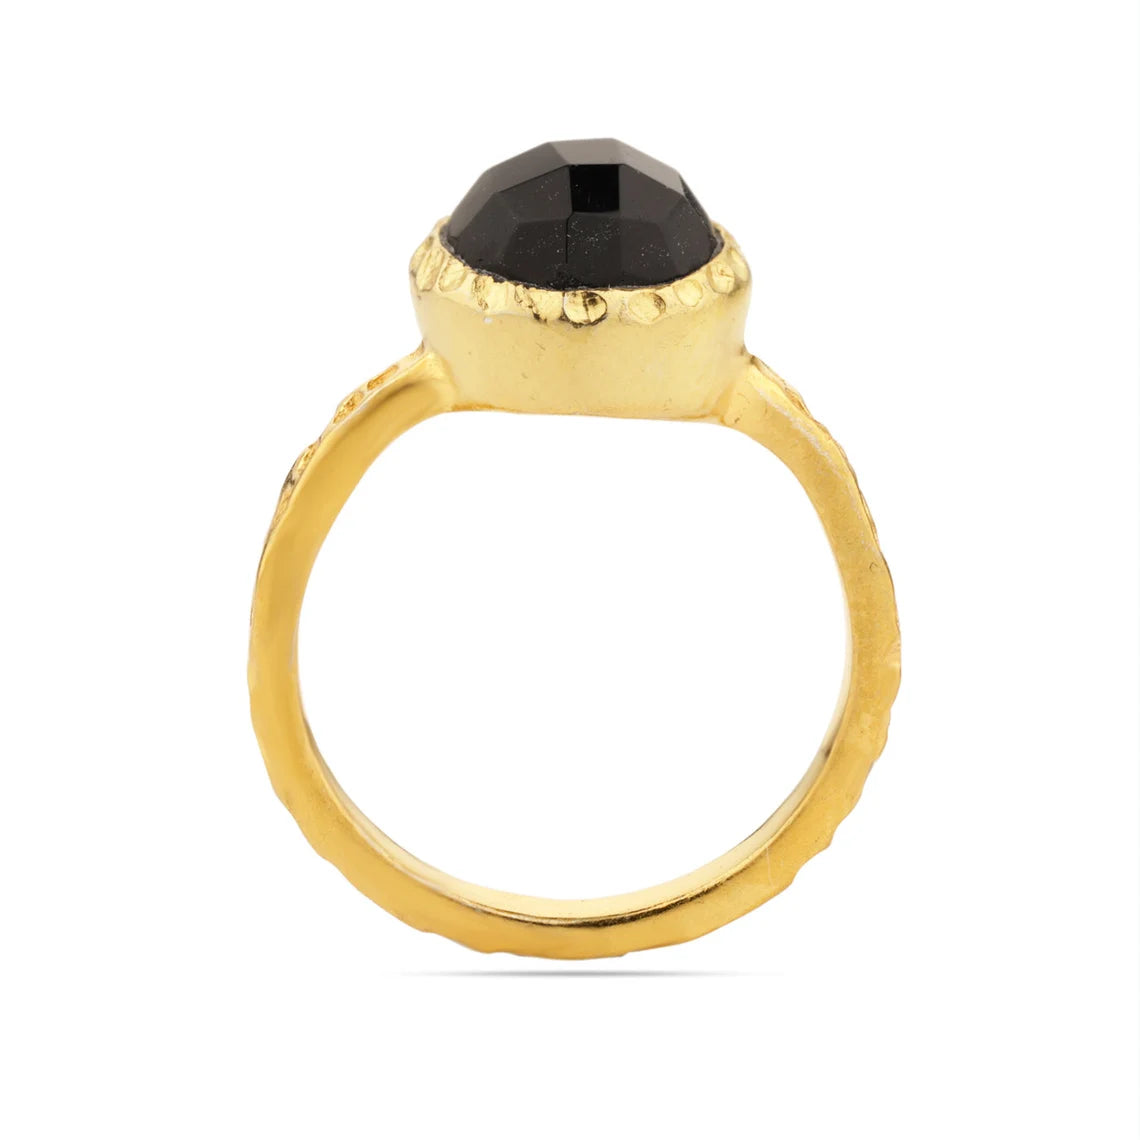 Black Onyx Ring, Round Ring, 925 Solid Sterling Silver, Natural Black Onyx Gemstone Ring, 18K Gold Fill Antique dott Finish Ring Unique